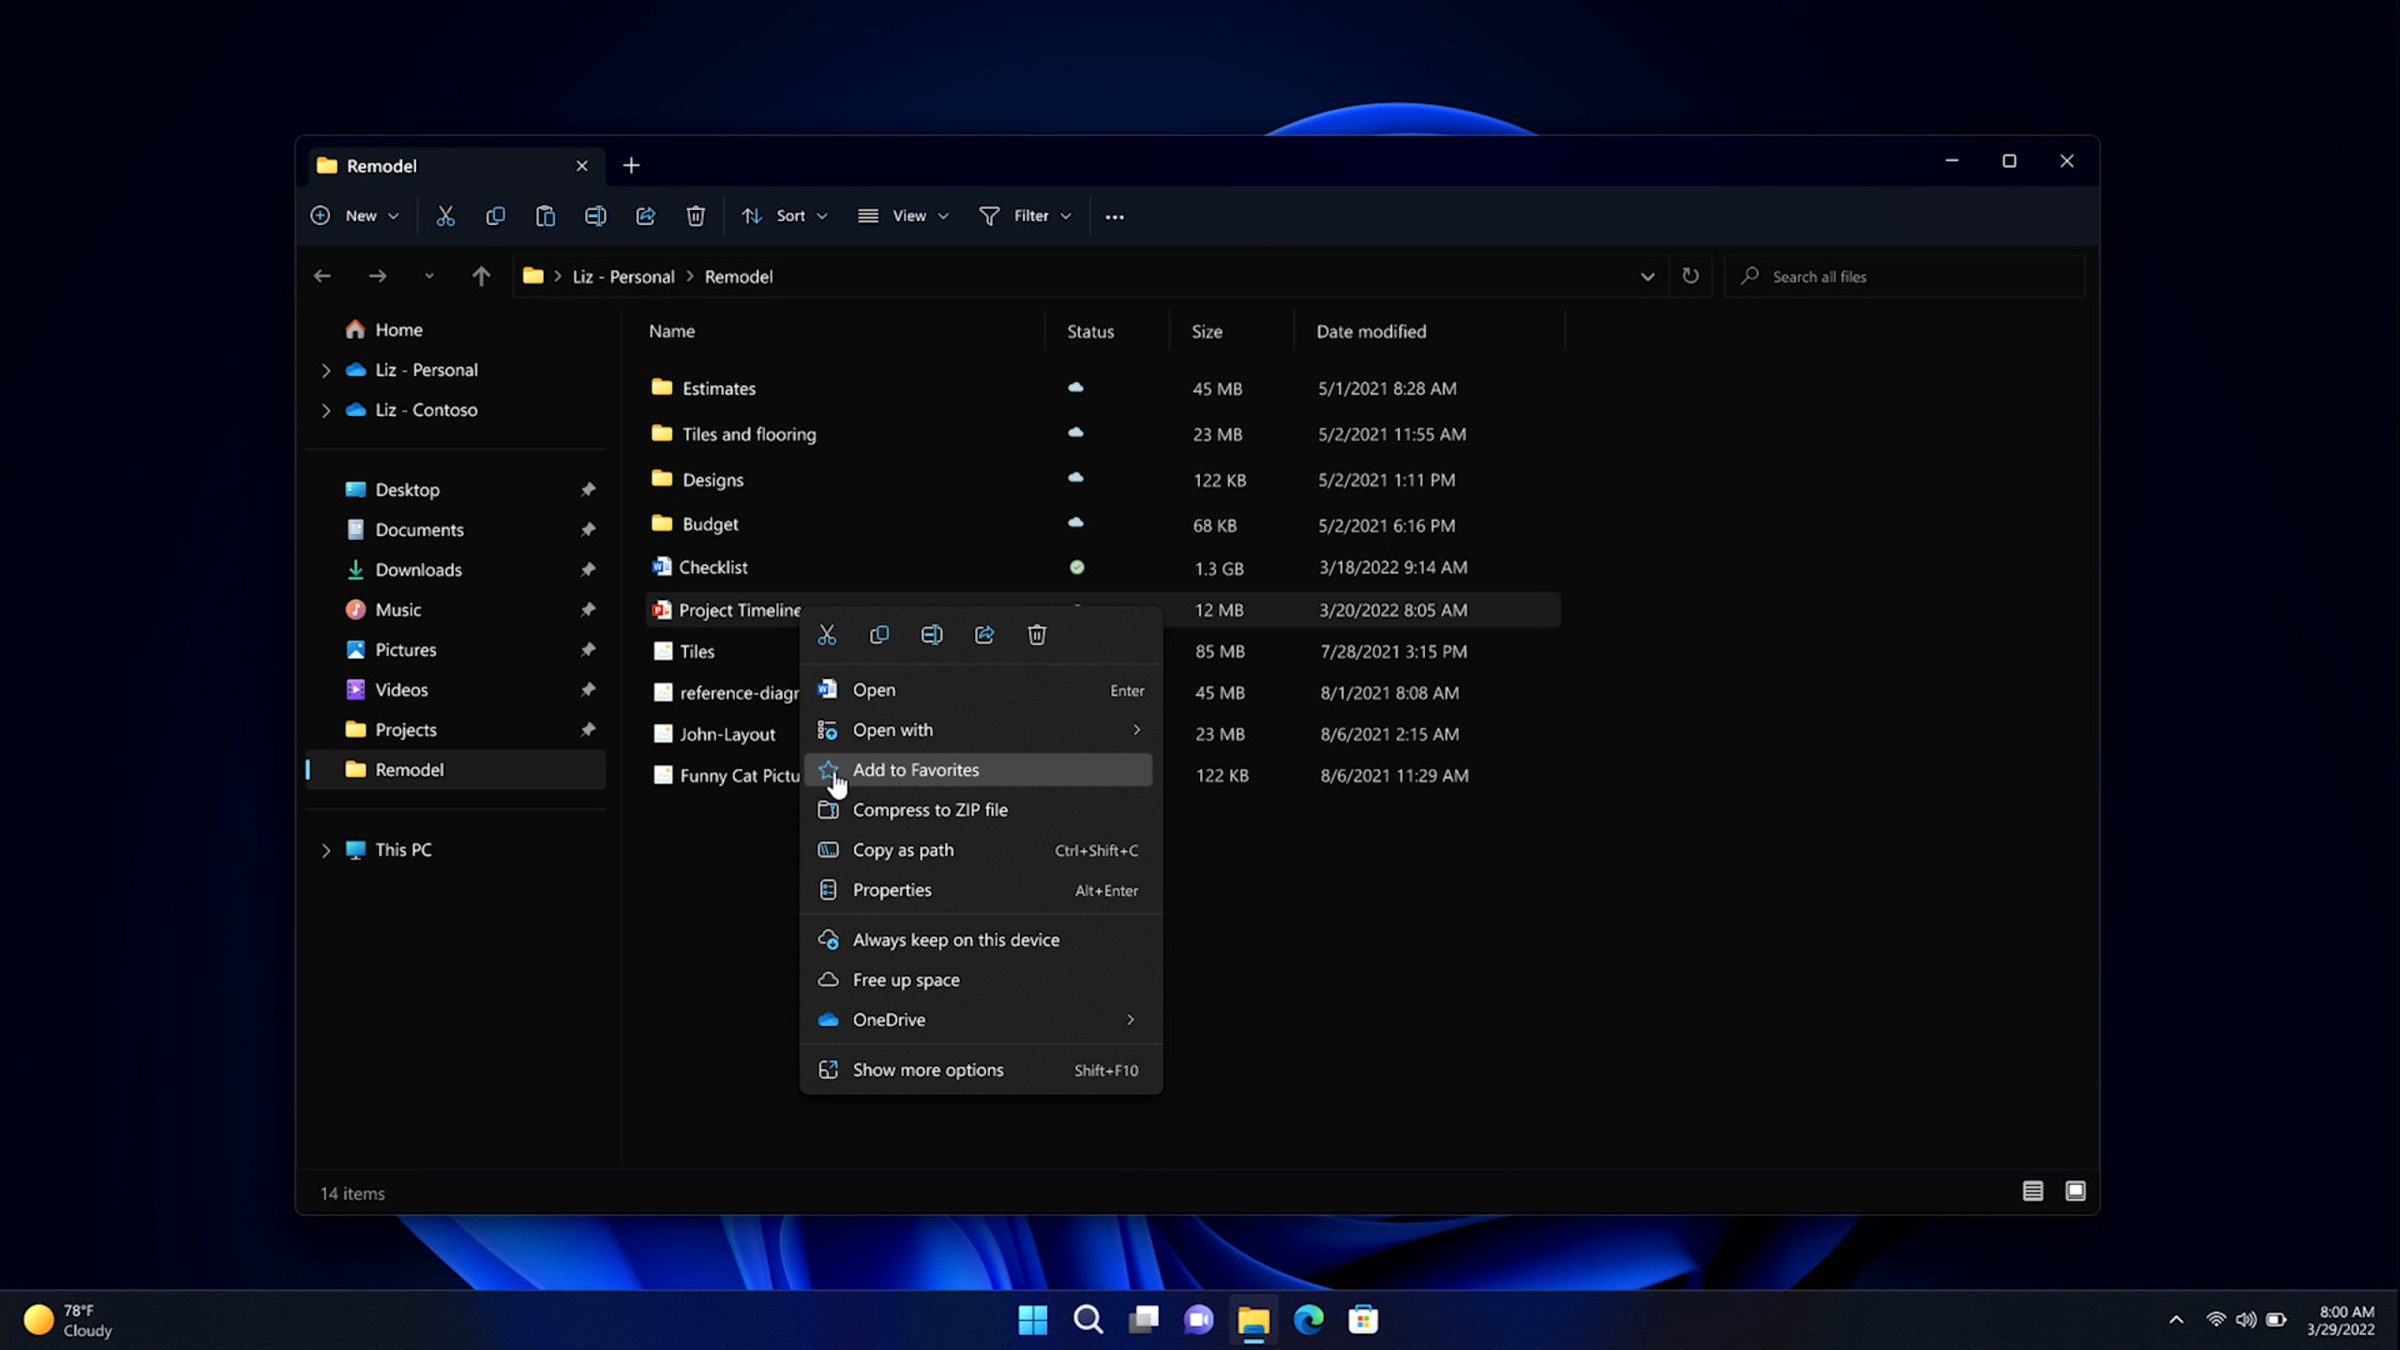 The new File Explorer favorites feature.